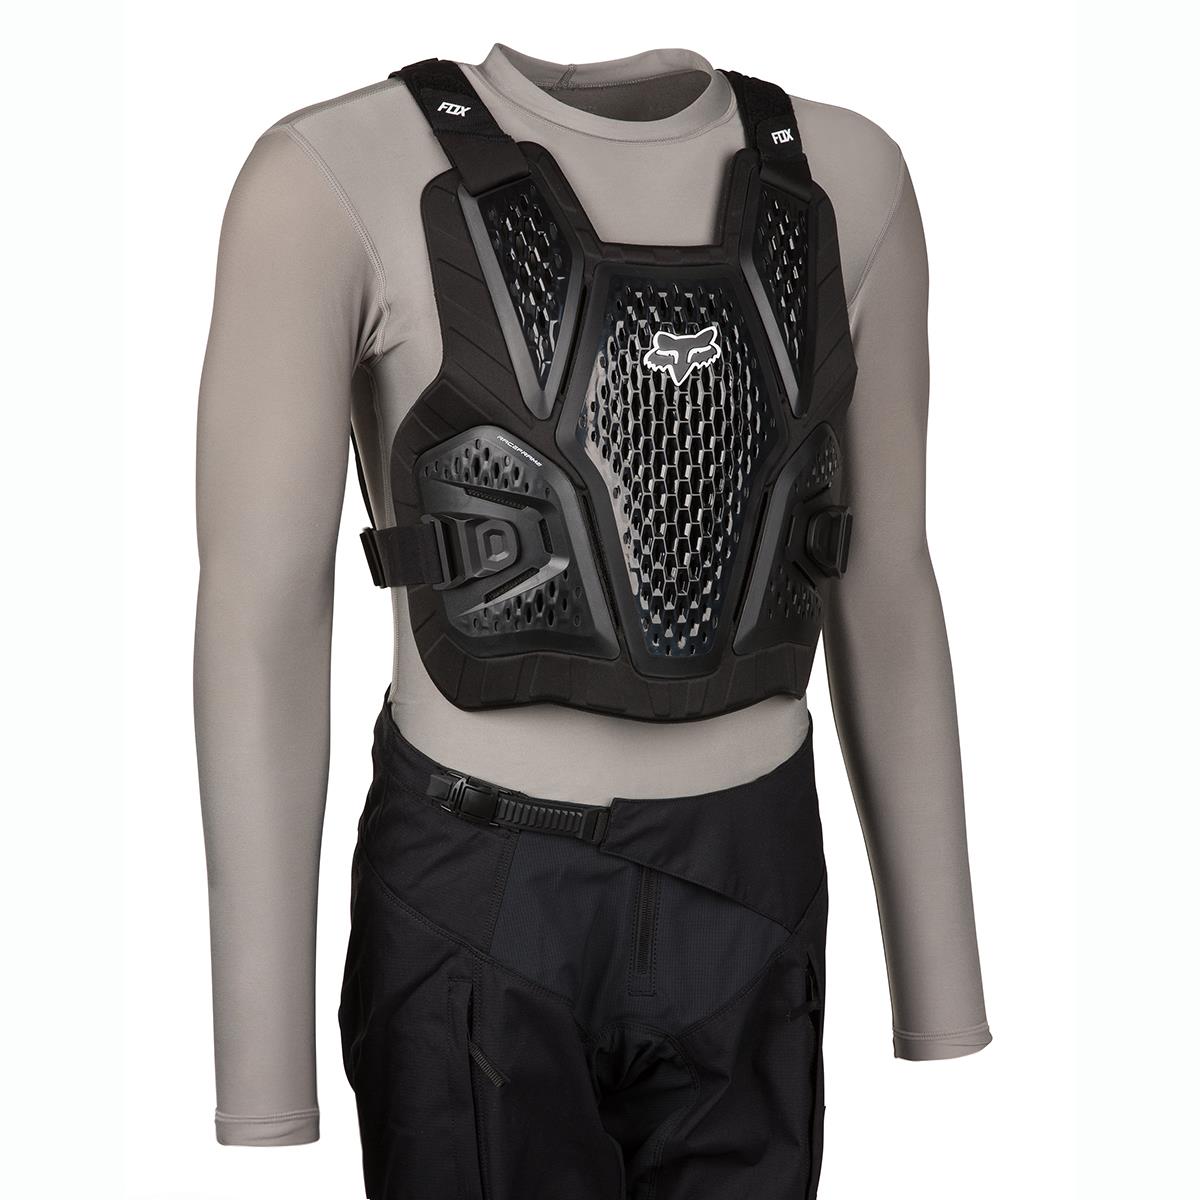 under armor chest protector shirt